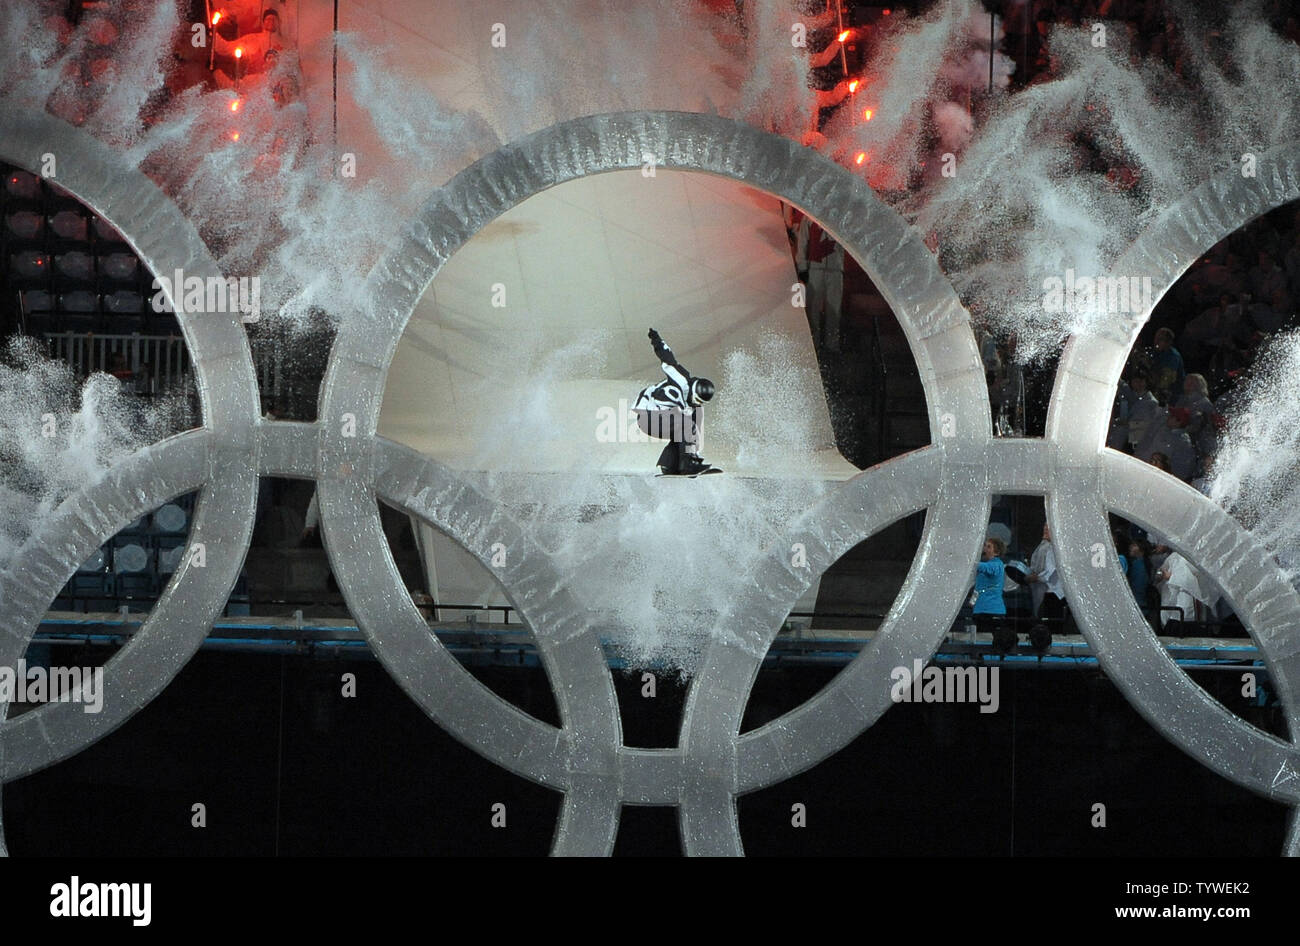 A snow boarder jumps through the Olympic Rings at the start of the Opening Ceremonies for the 2010 Winter Olympics at BC Place in Vancouver, Canada on February 12, 2010.     UPI/Roger L. Wollenberg Stock Photo